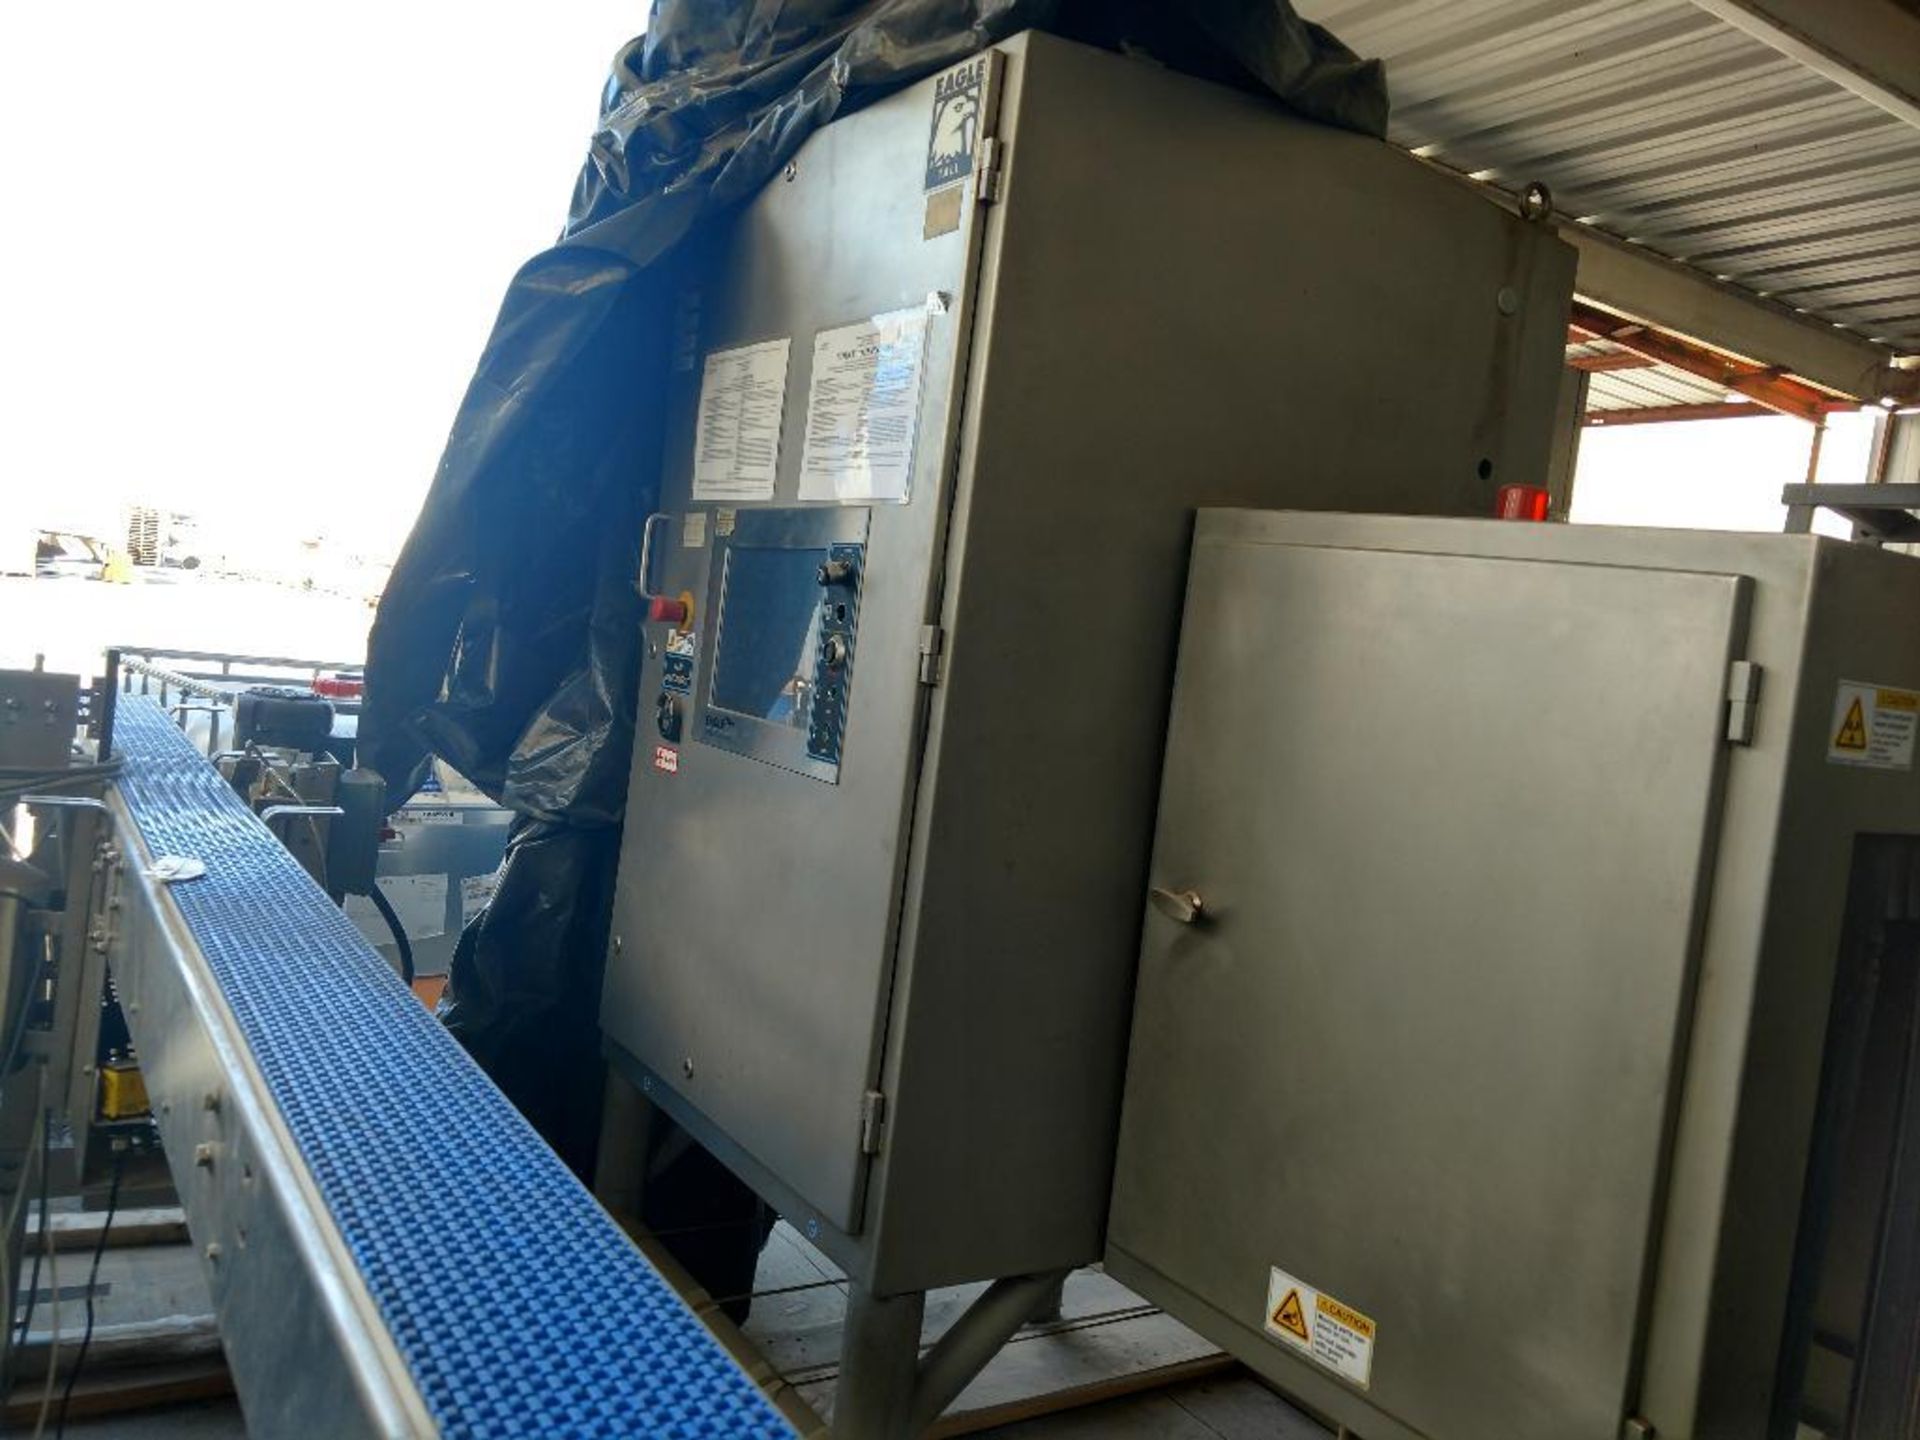 2006 Smiths x-ray machine, Type Eagle Tall 100935, SN 100935, 11.5 in. wide x 20 in. tall aperture,